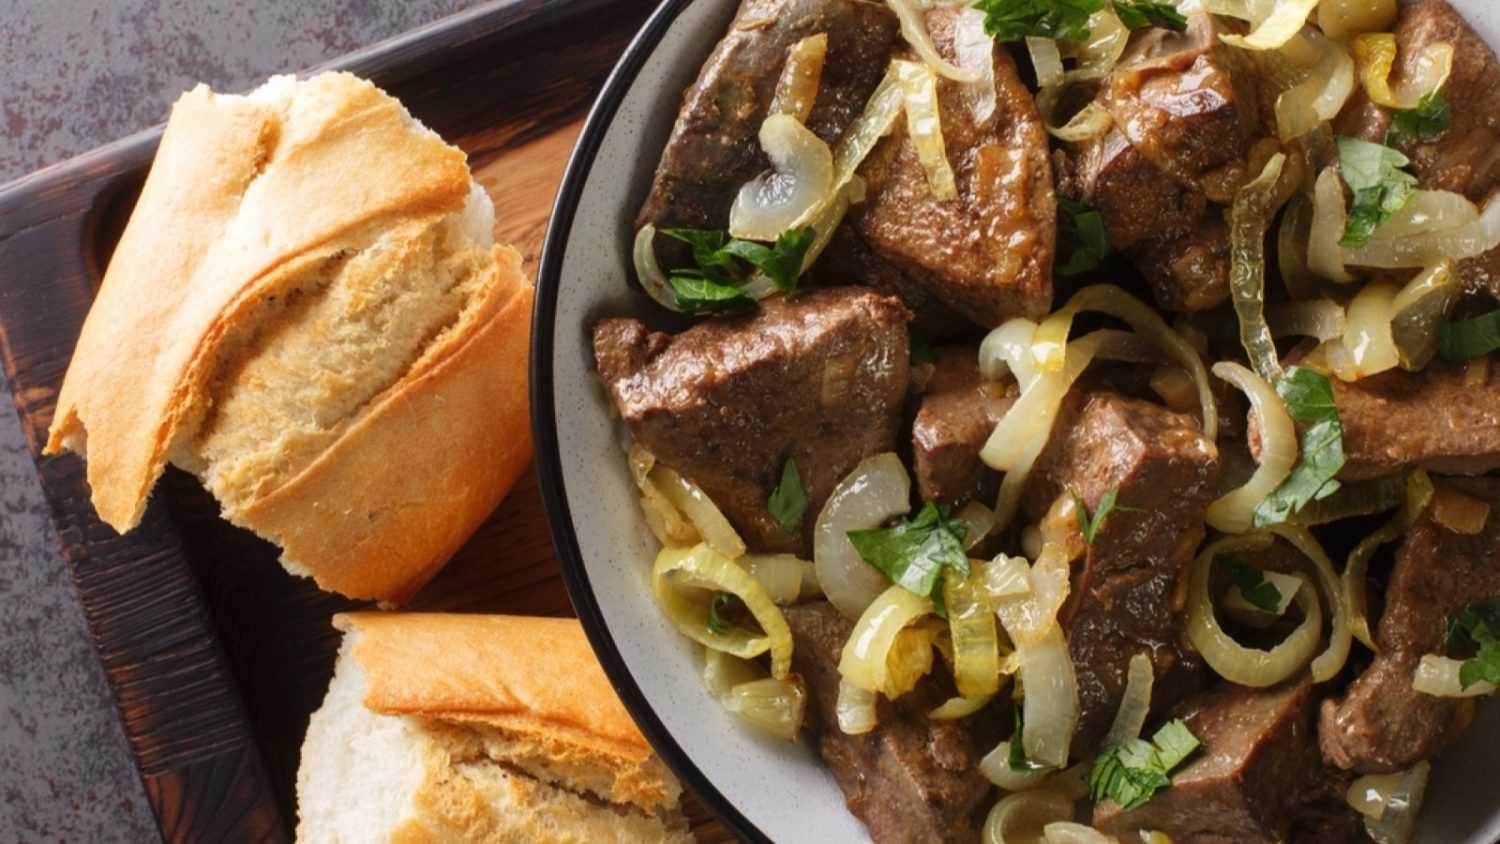 Liver and onions